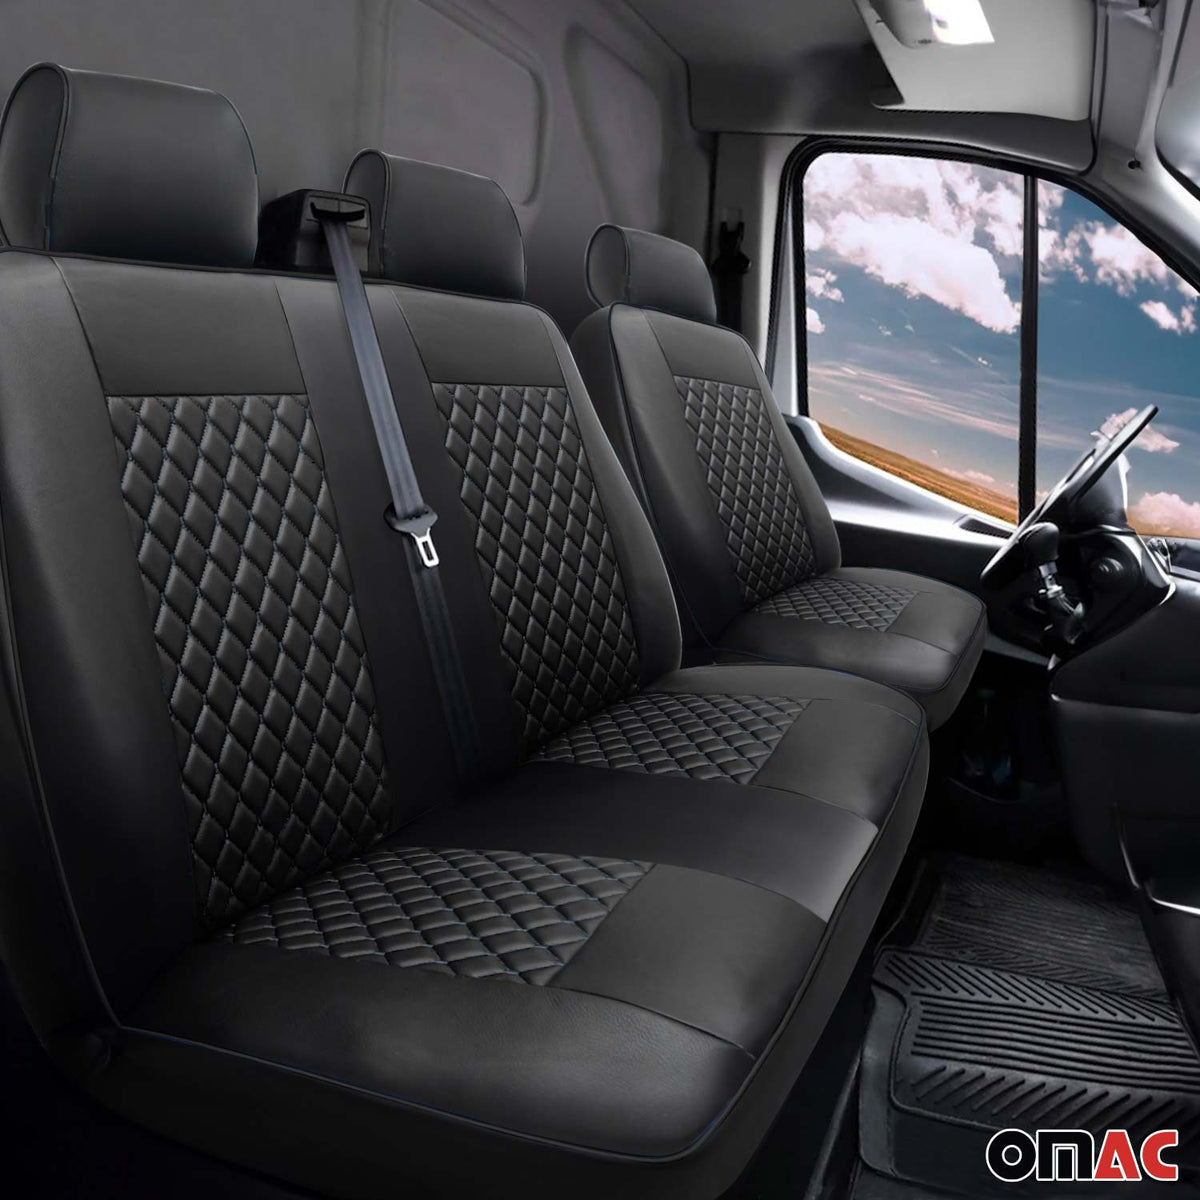 Seat covers protective covers for Mercedes Sprinter W906 2006-2018 leather black 2+1